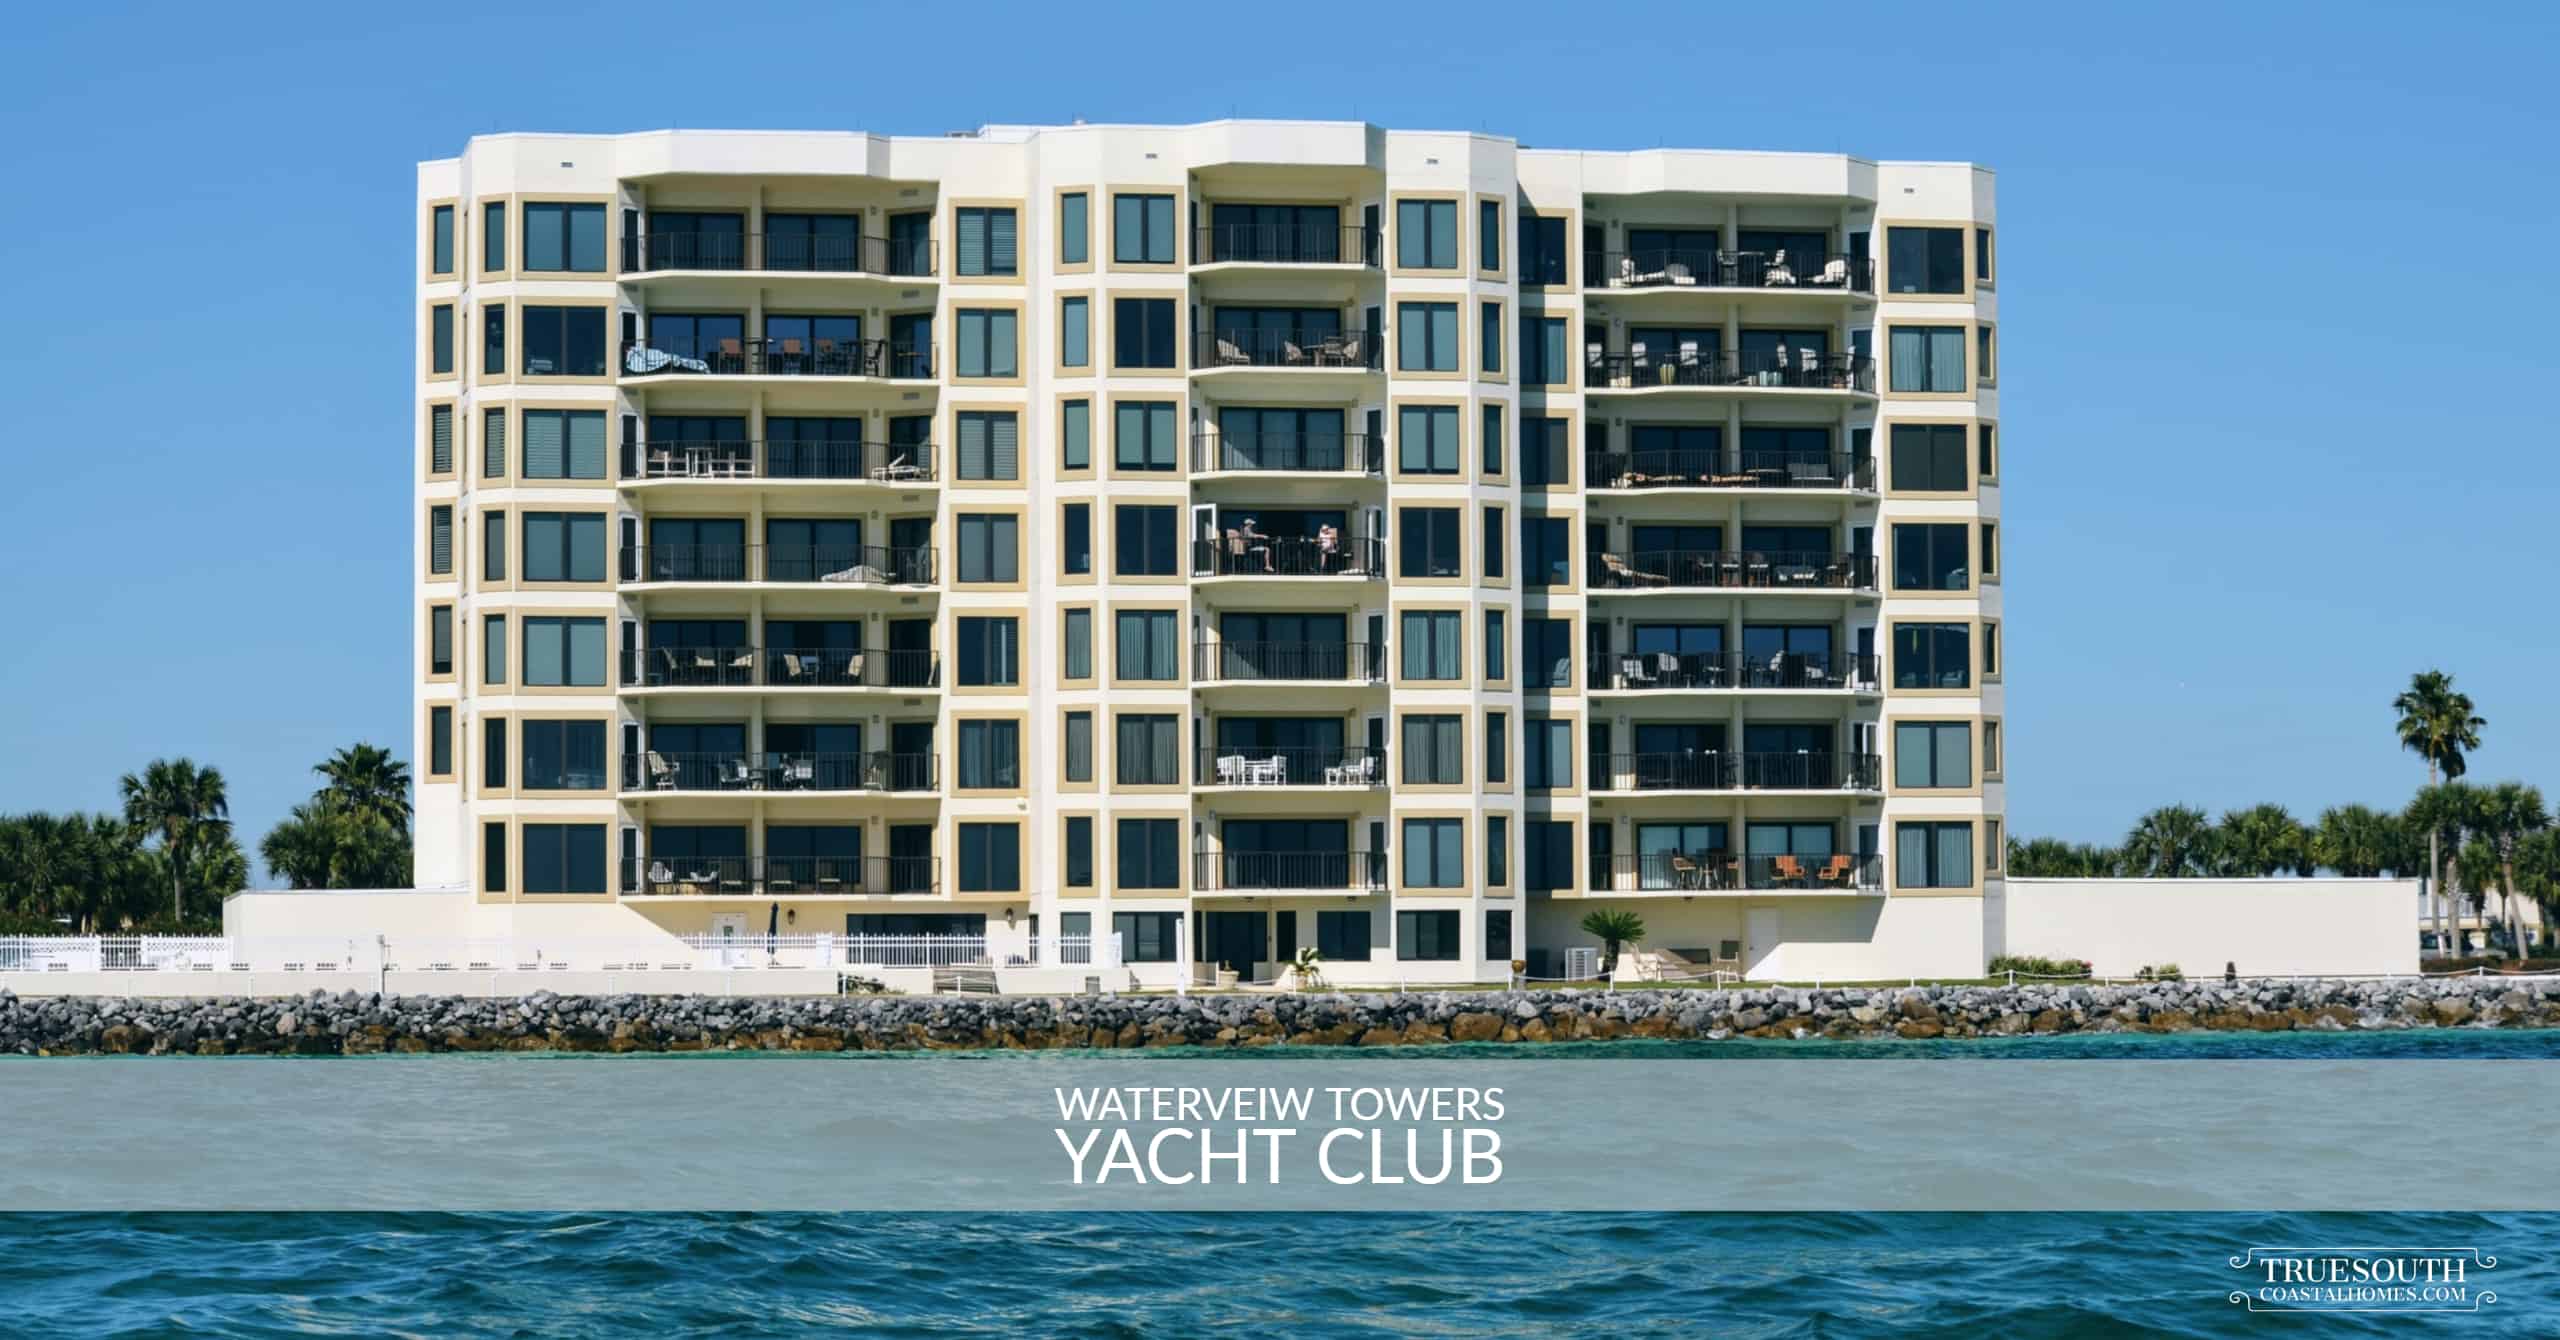 east pass towers yacht club